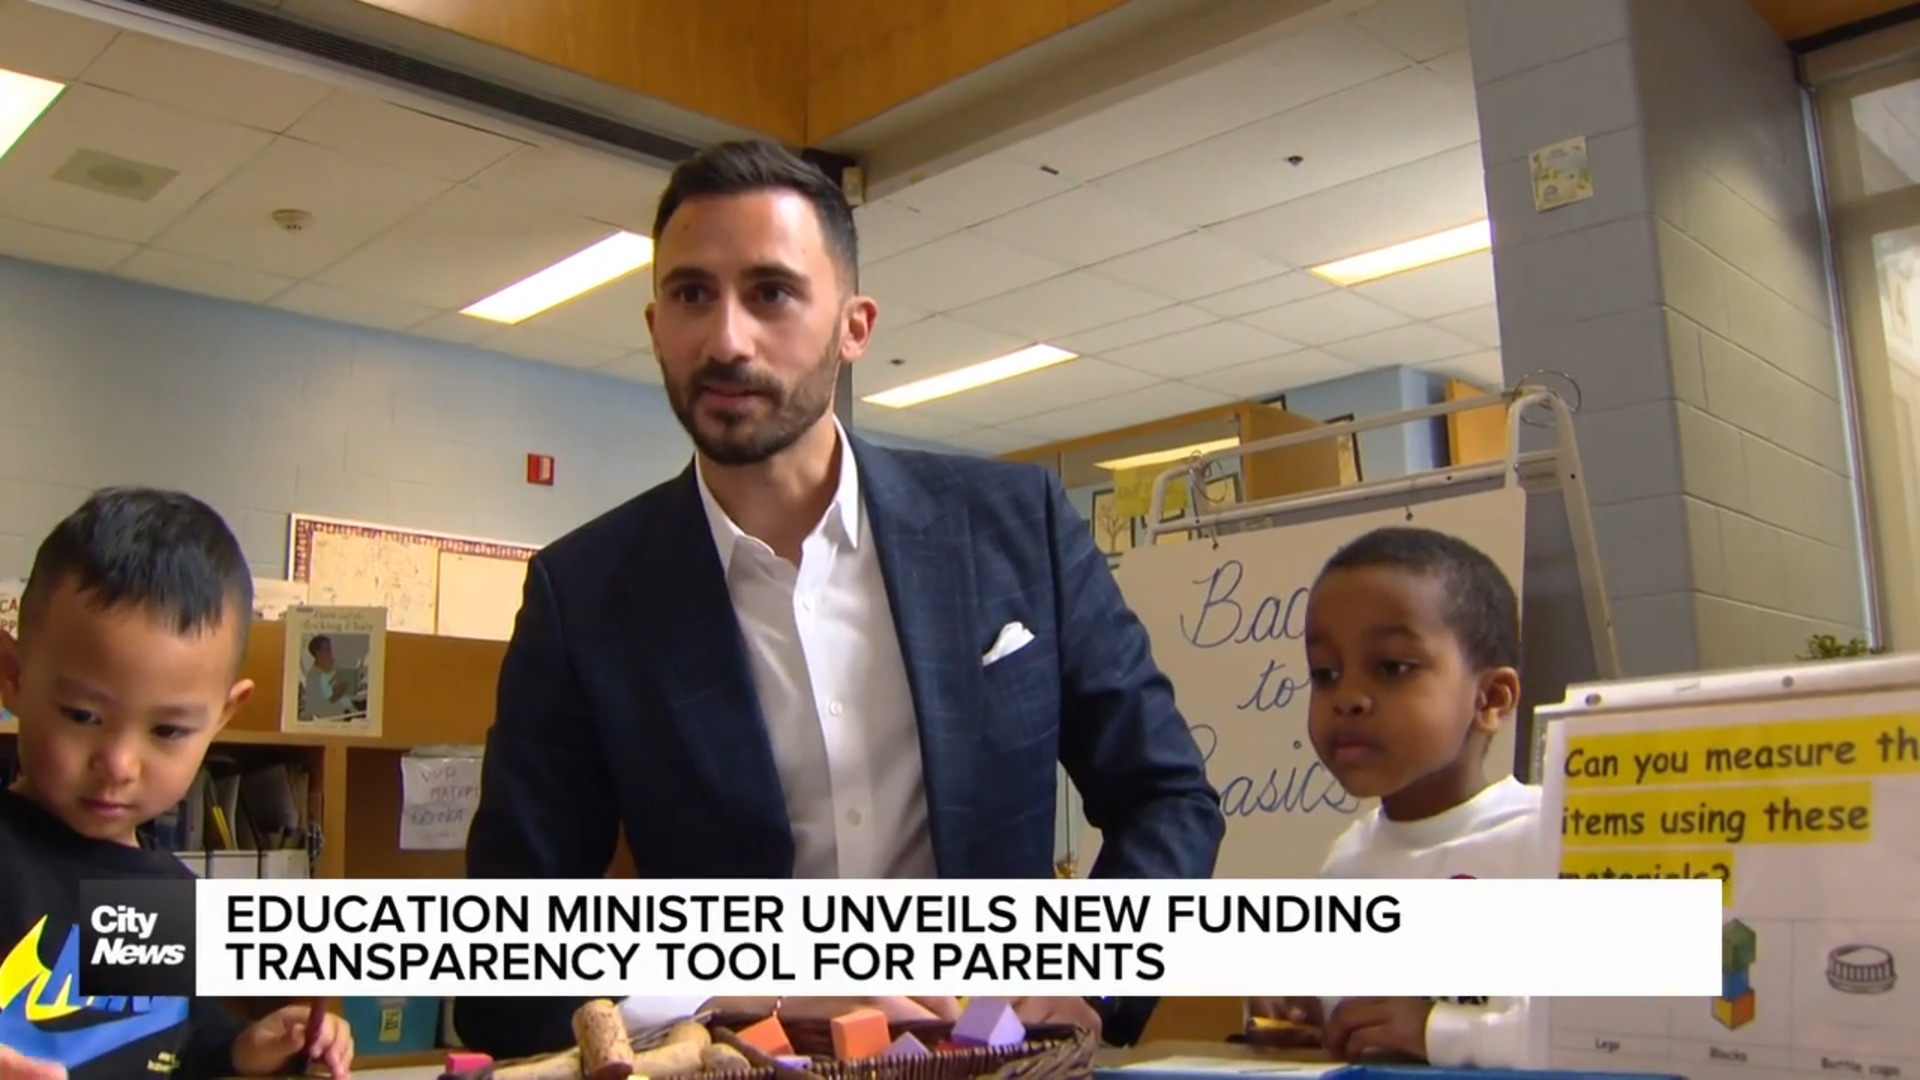 Education minister reveals new funding transparency tool for parents